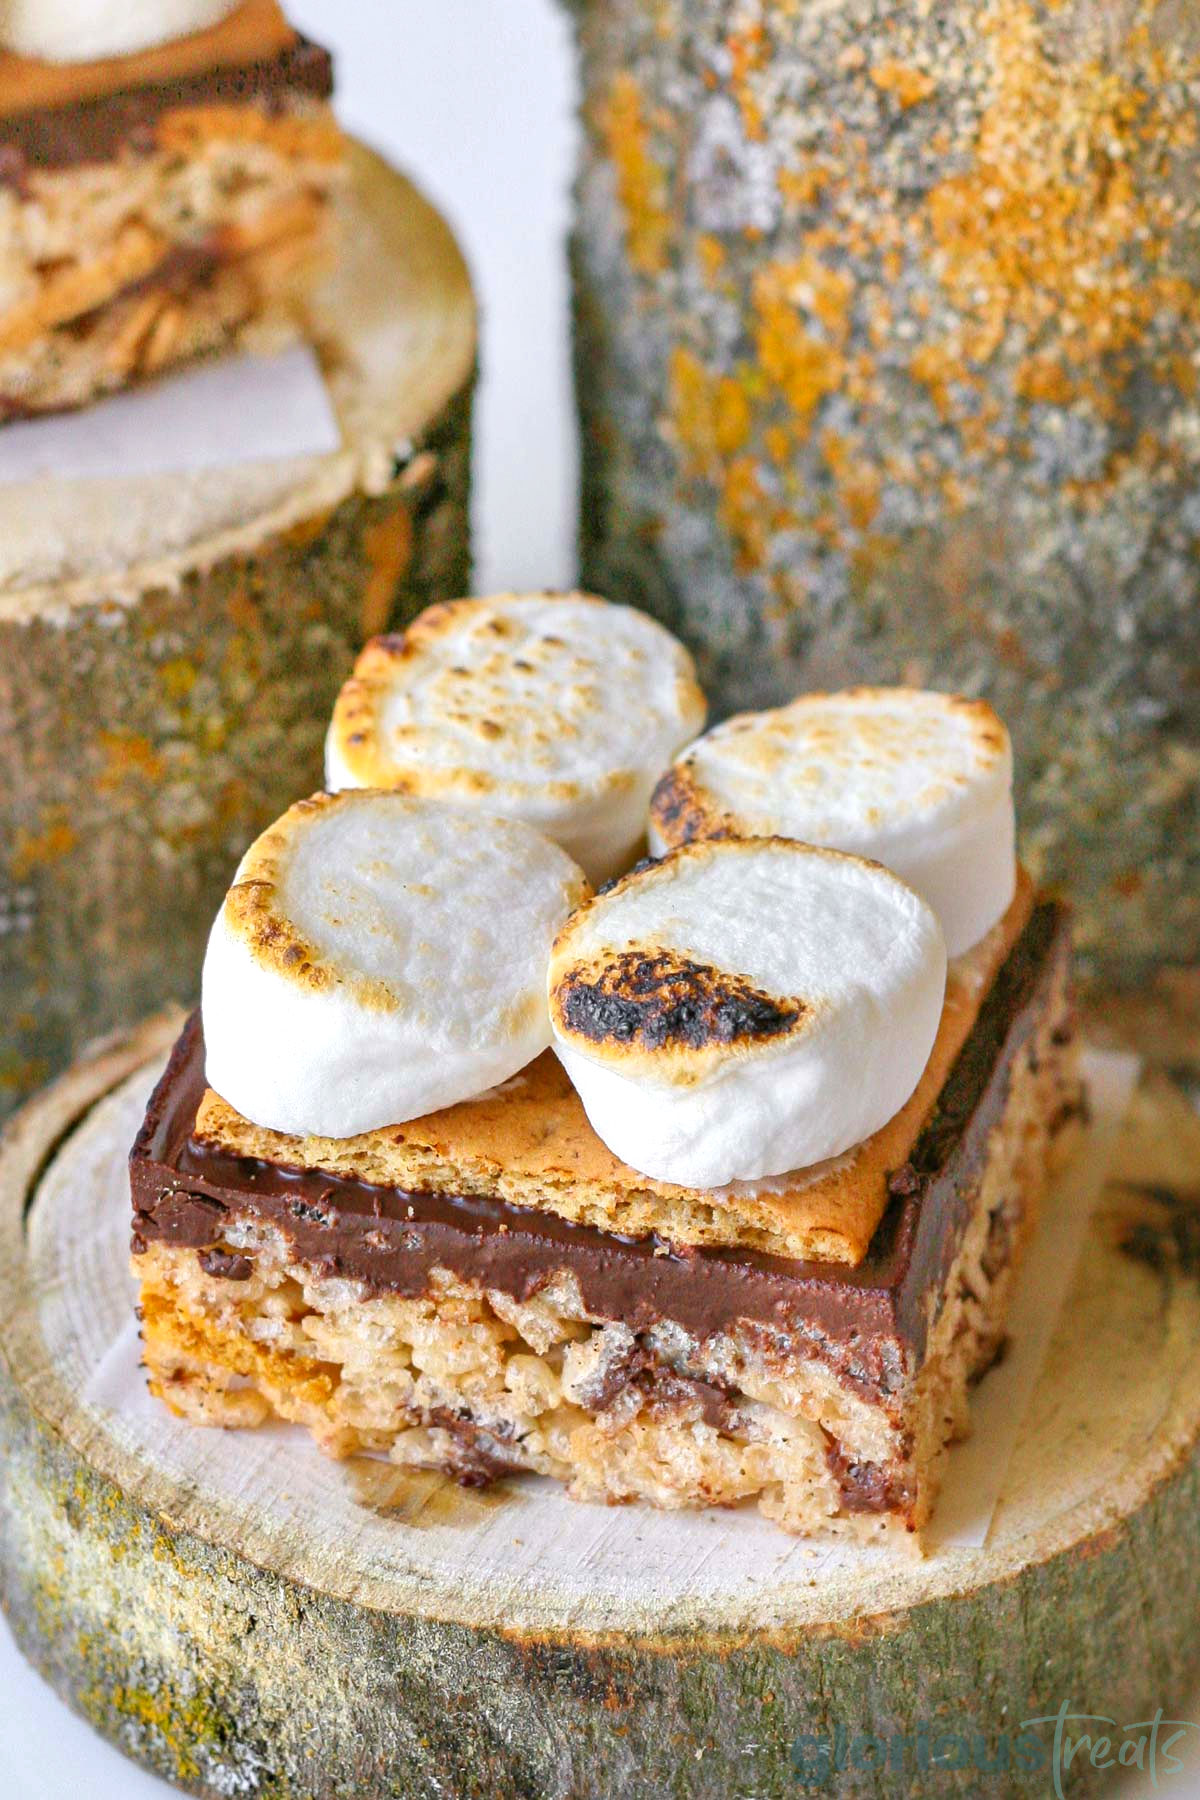 Toasted marshmallows on a smores rice rice krispie treat sitting on a log. More logs of varying heights can be seen in the background.